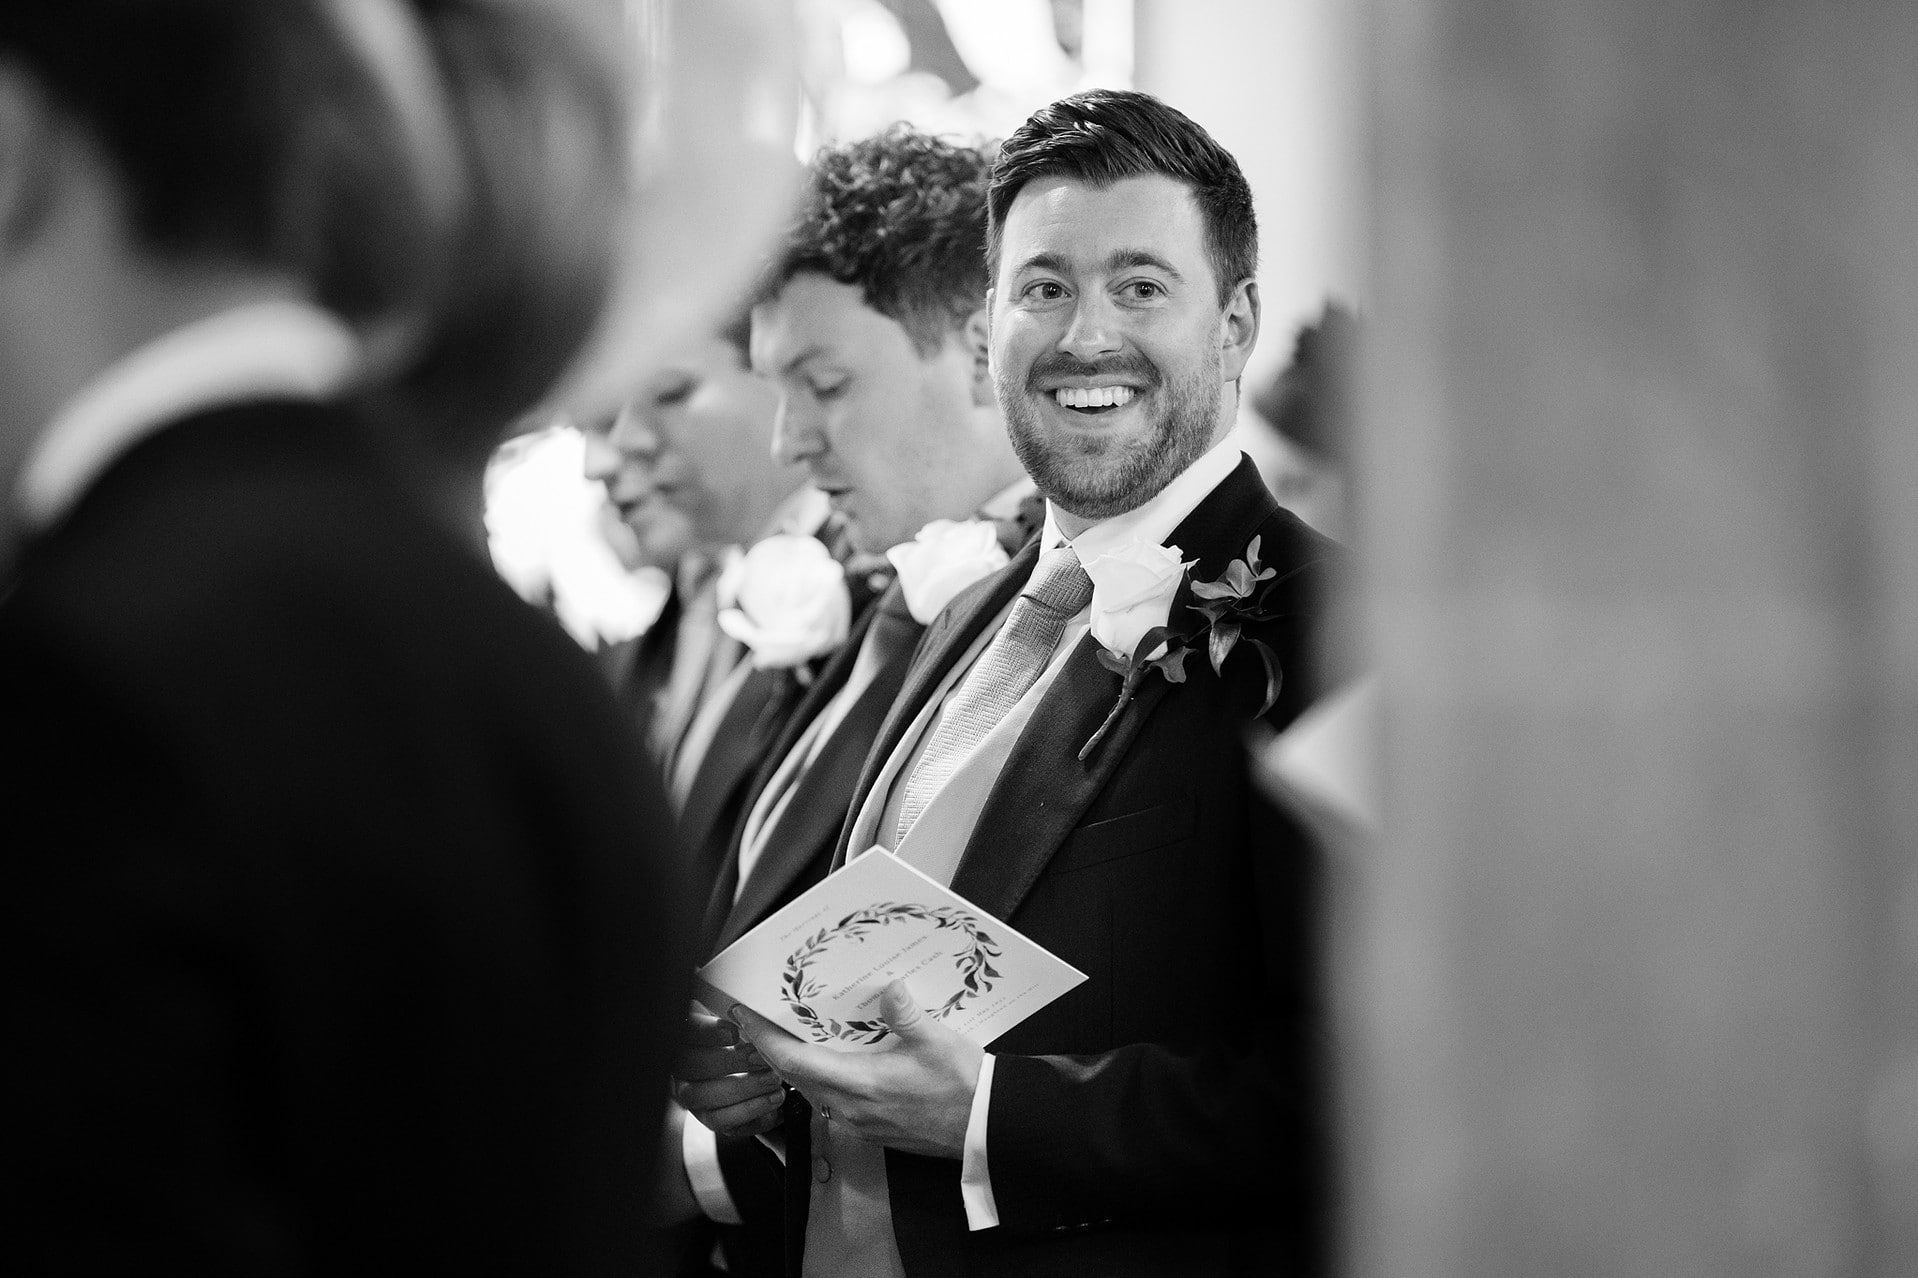 Best Man smiling broadly at another wedding guest during a hymn